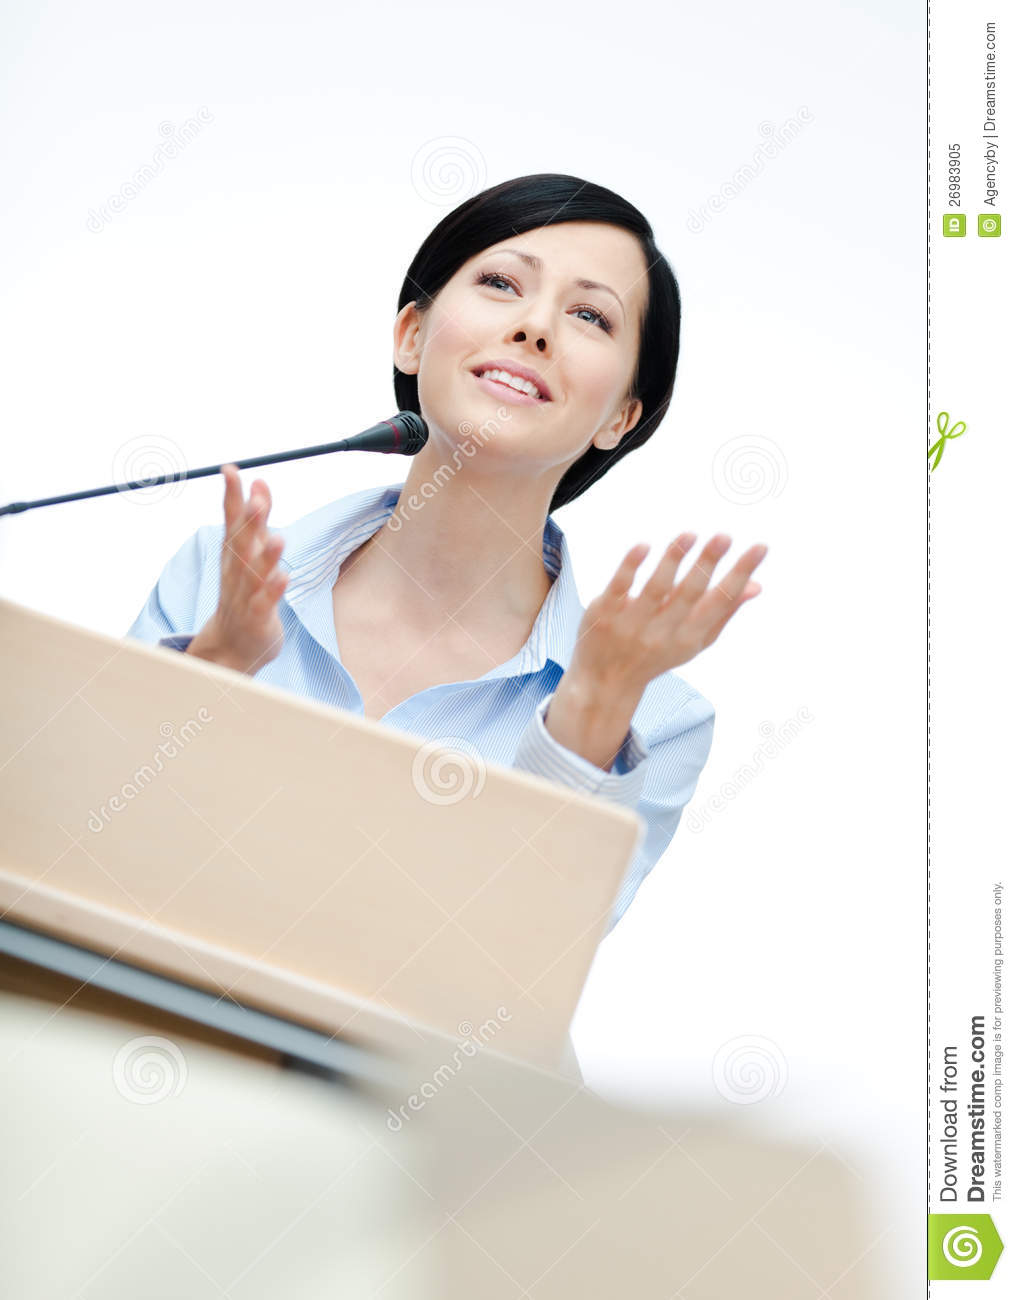 Woman Speaker At The Board Royalty Free Stock Photo   Image  26983905